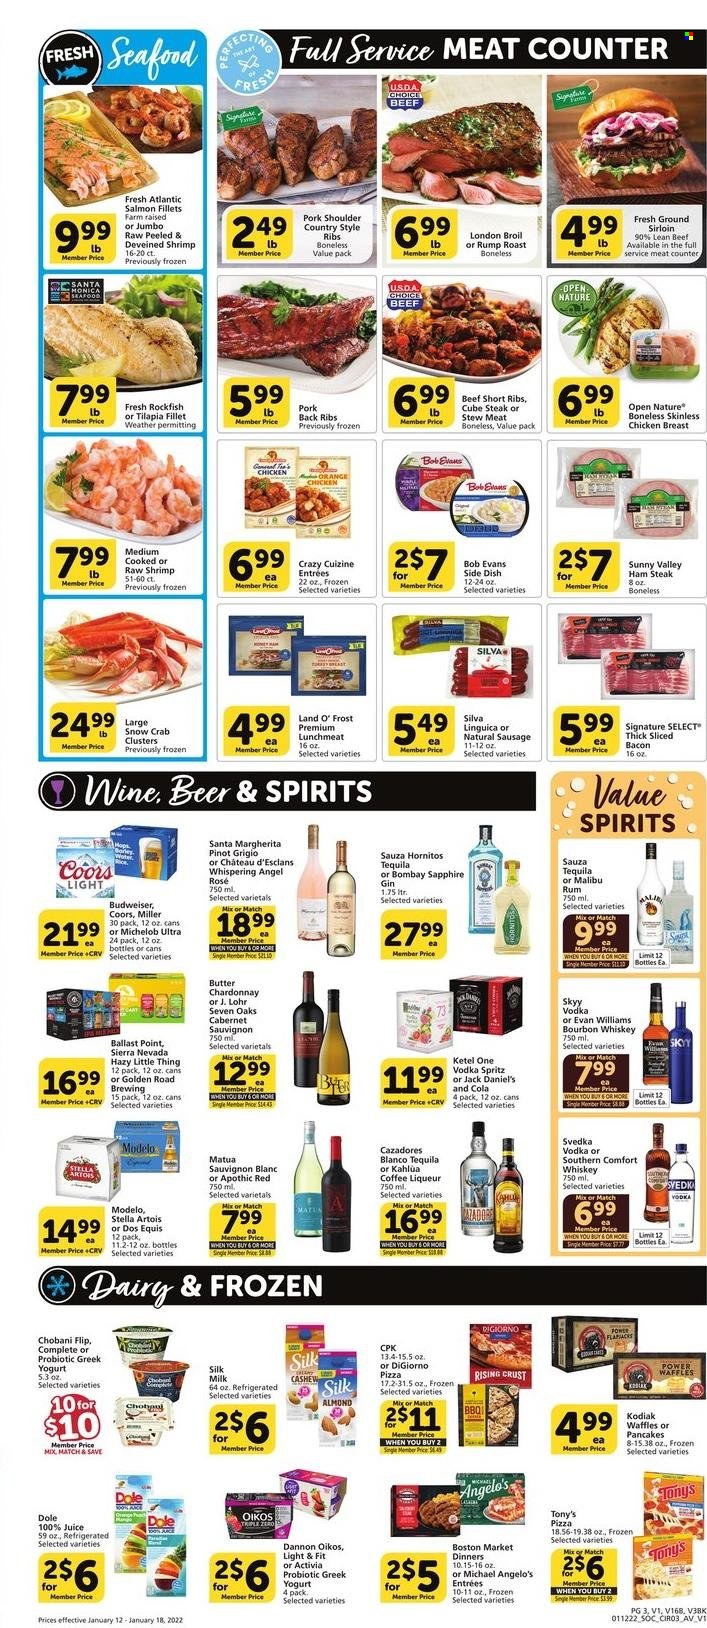 thumbnail - Vons Flyer - 01/12/2022 - 01/18/2022 - Sales products - waffles, Dole, oranges, chicken breasts, beef meat, beef ribs, stew meat, steak, Bob Evans, pork meat, pork ribs, pork shoulder, pork back ribs, country style ribs, rockfish, salmon, salmon fillet, tilapia, crab, shrimps, Jack Daniel's, pizza, bacon, ham, sausage, lunch meat, ham steaks, greek yoghurt, yoghurt, Oikos, Chobani, Dannon, milk, butter, juice, coffee, Kahlúa, Cabernet Sauvignon, red wine, white wine, Chardonnay, Pinot Grigio, Sauvignon Blanc, rosé wine, gin, liqueur, rum, tequila, vodka, whiskey, SKYY, Malibu, bourbon whiskey, whisky, beer, Miller, Modelo, Budweiser, Stella Artois, Coors, Dos Equis, Michelob. Page 3.